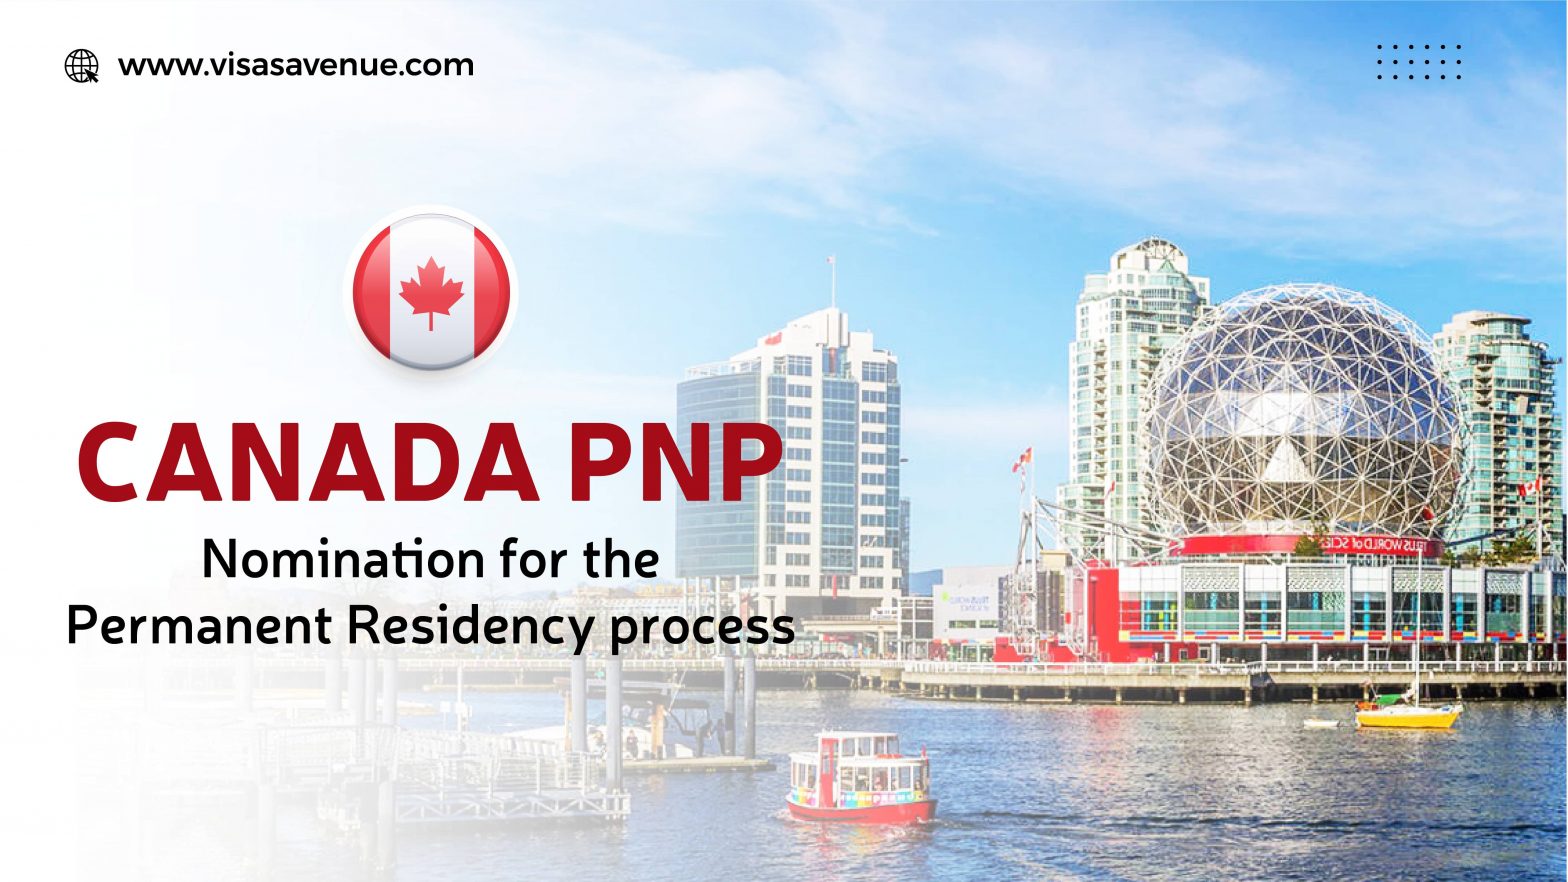 Canada PNP nomination for the Permanent Residency process